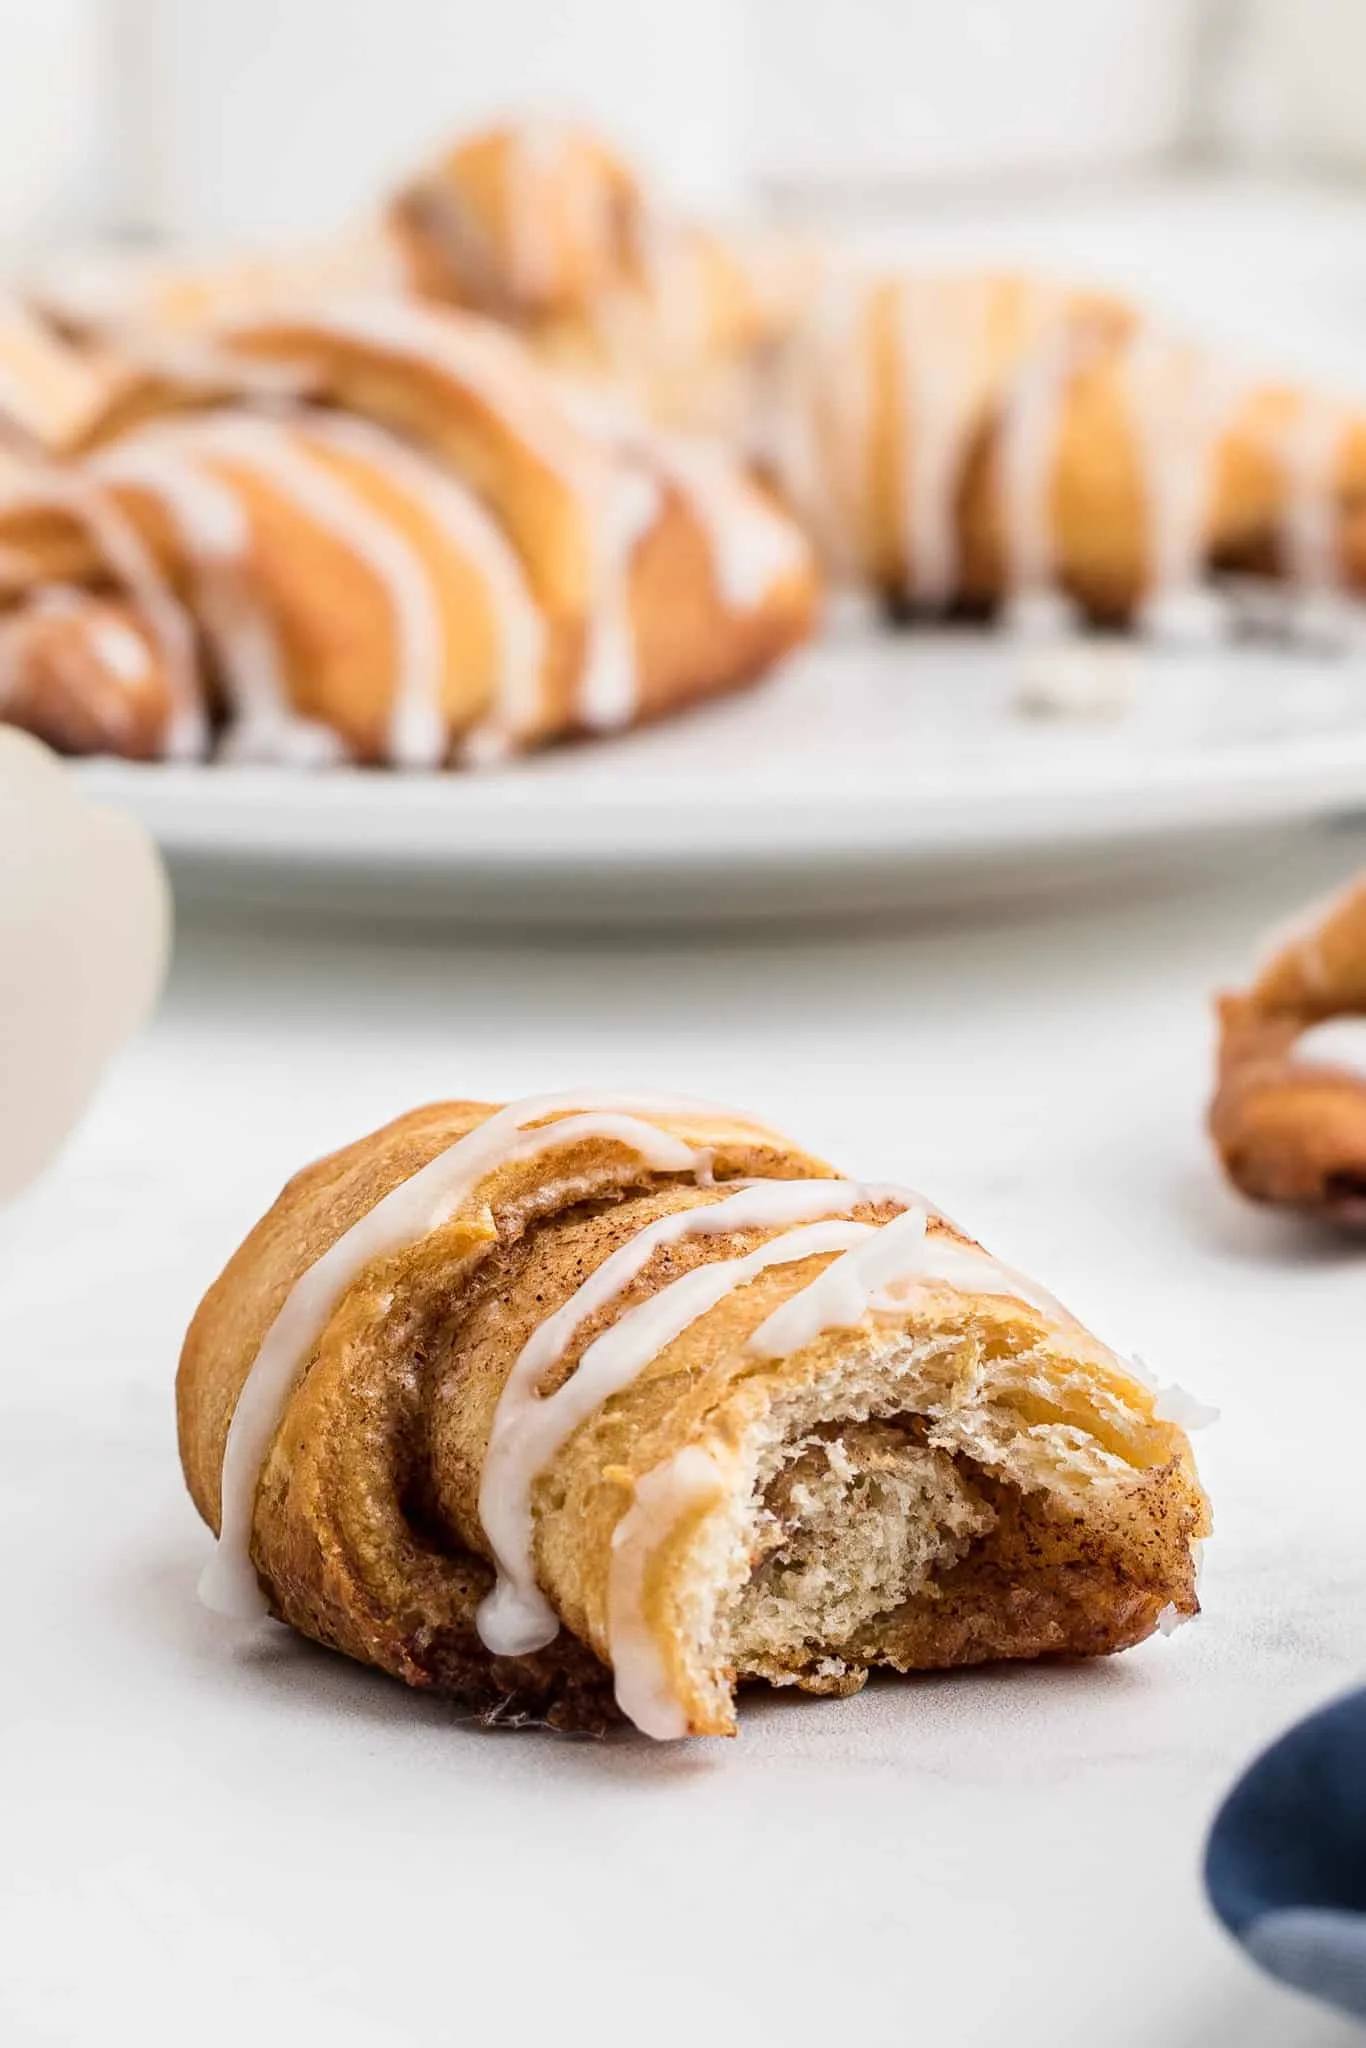 Cinnamon Crescent Rolls are an easy breakfast or dessert recipe using Pillsbury crescent rolls filled with a sweet cinnamon mixture and drizzled with icing.